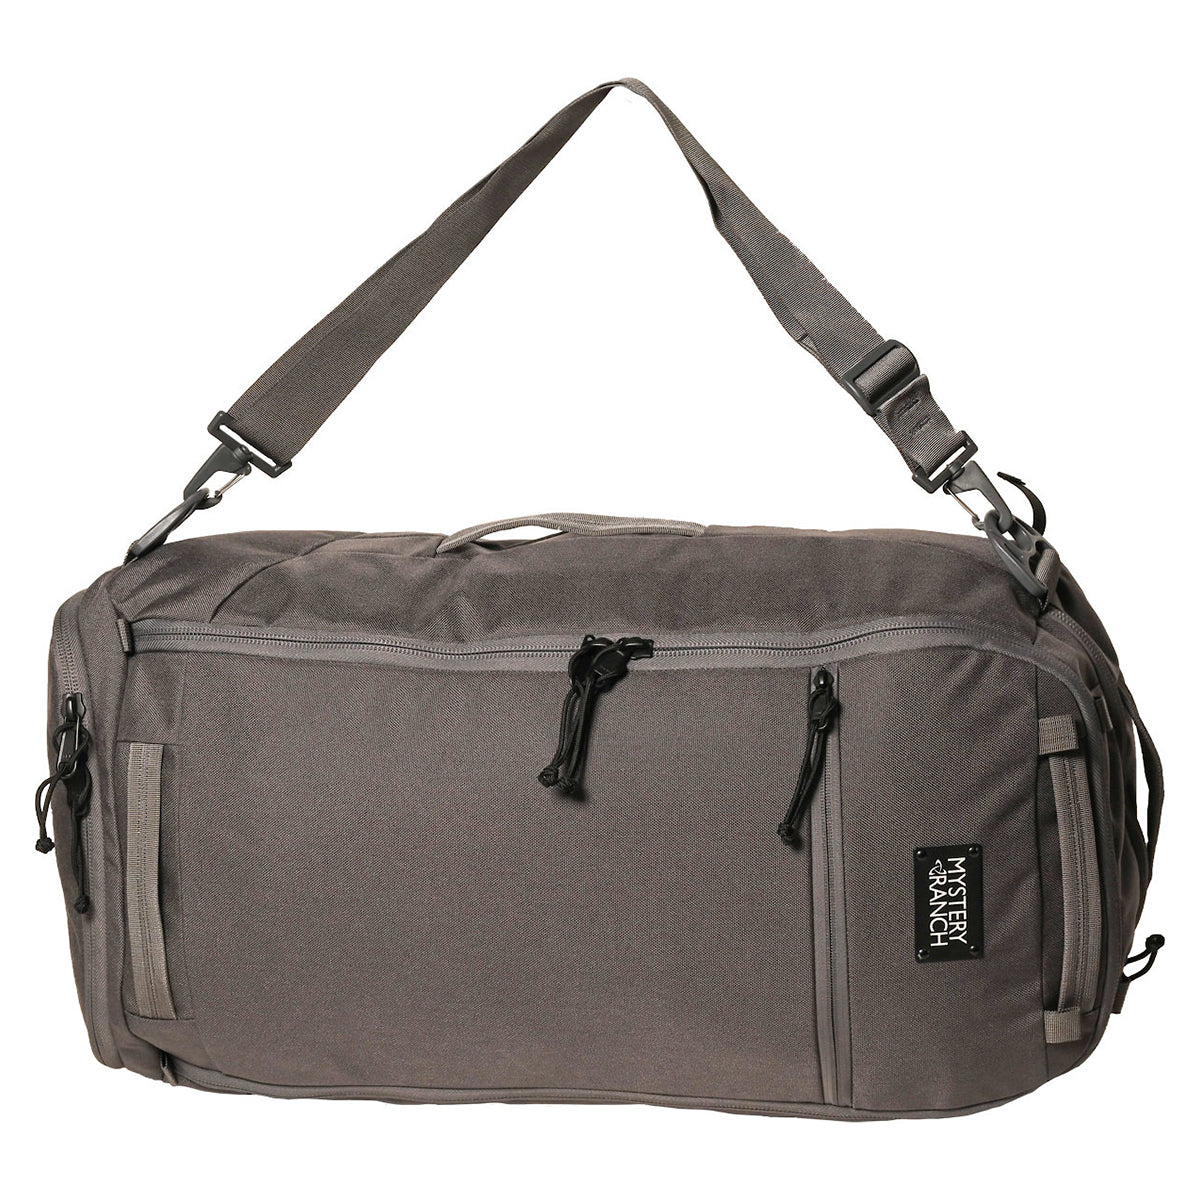 Mystery Ranch Mission 40L Duffel Bag in Mystery Ranch Mission 40L Duffel Bag (2020) by Mystery Ranch | Gear - goHUNT Shop by GOHUNT | Mystery Ranch - GOHUNT Shop